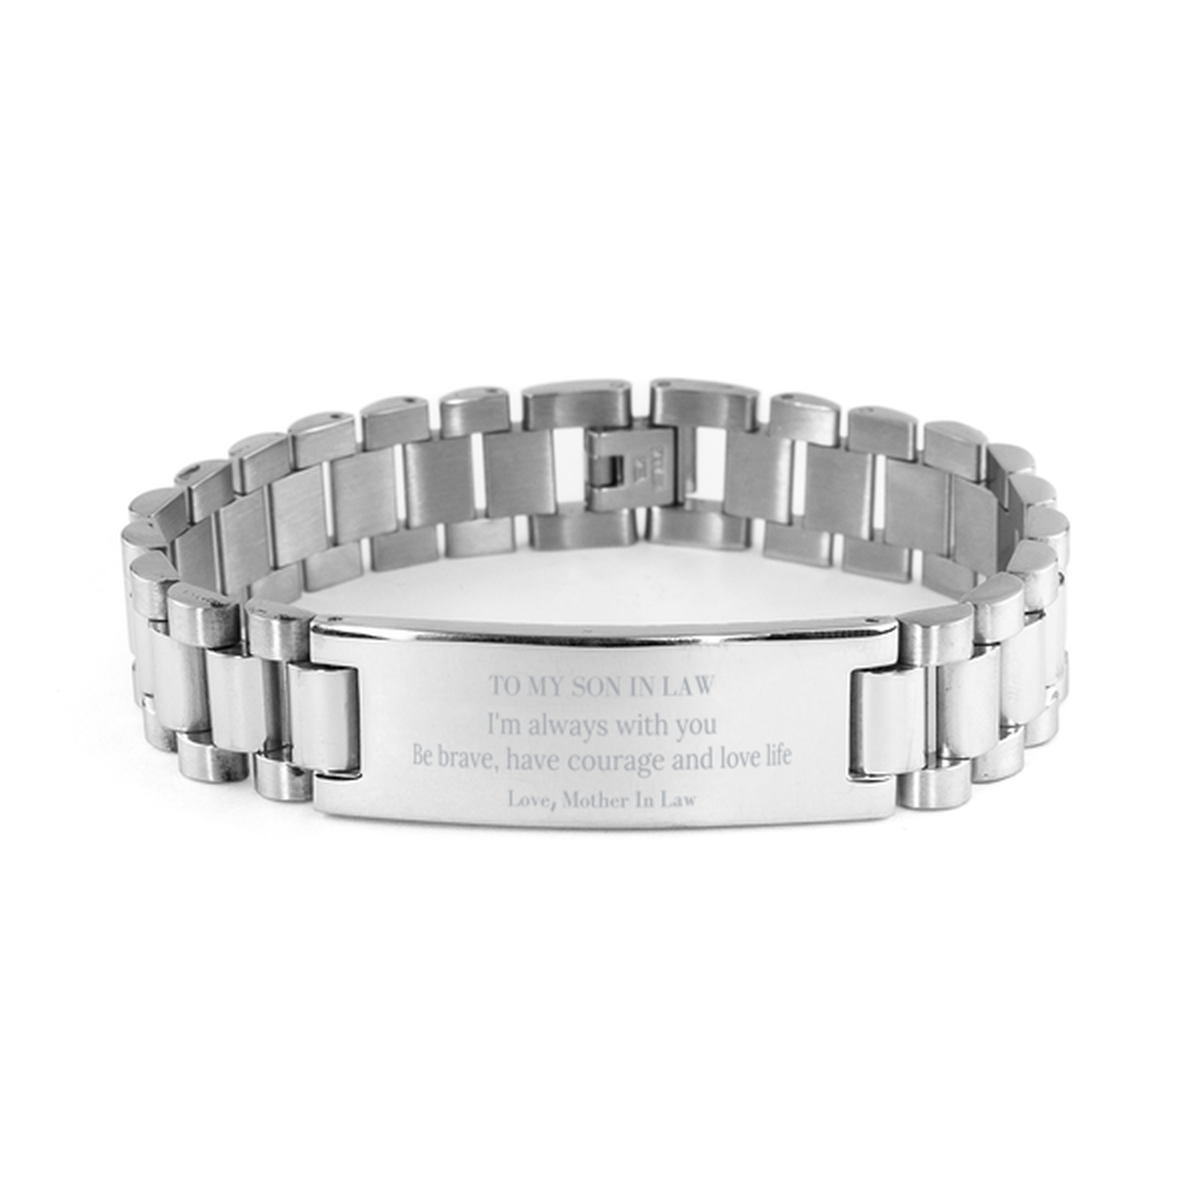 To My Son In Law Gifts from Mother In Law, Unique Ladder Stainless Steel Bracelet Inspirational Christmas Birthday Graduation Gifts for Son In Law I'm always with you. Be brave, have courage and love life. Love, Mother In Law